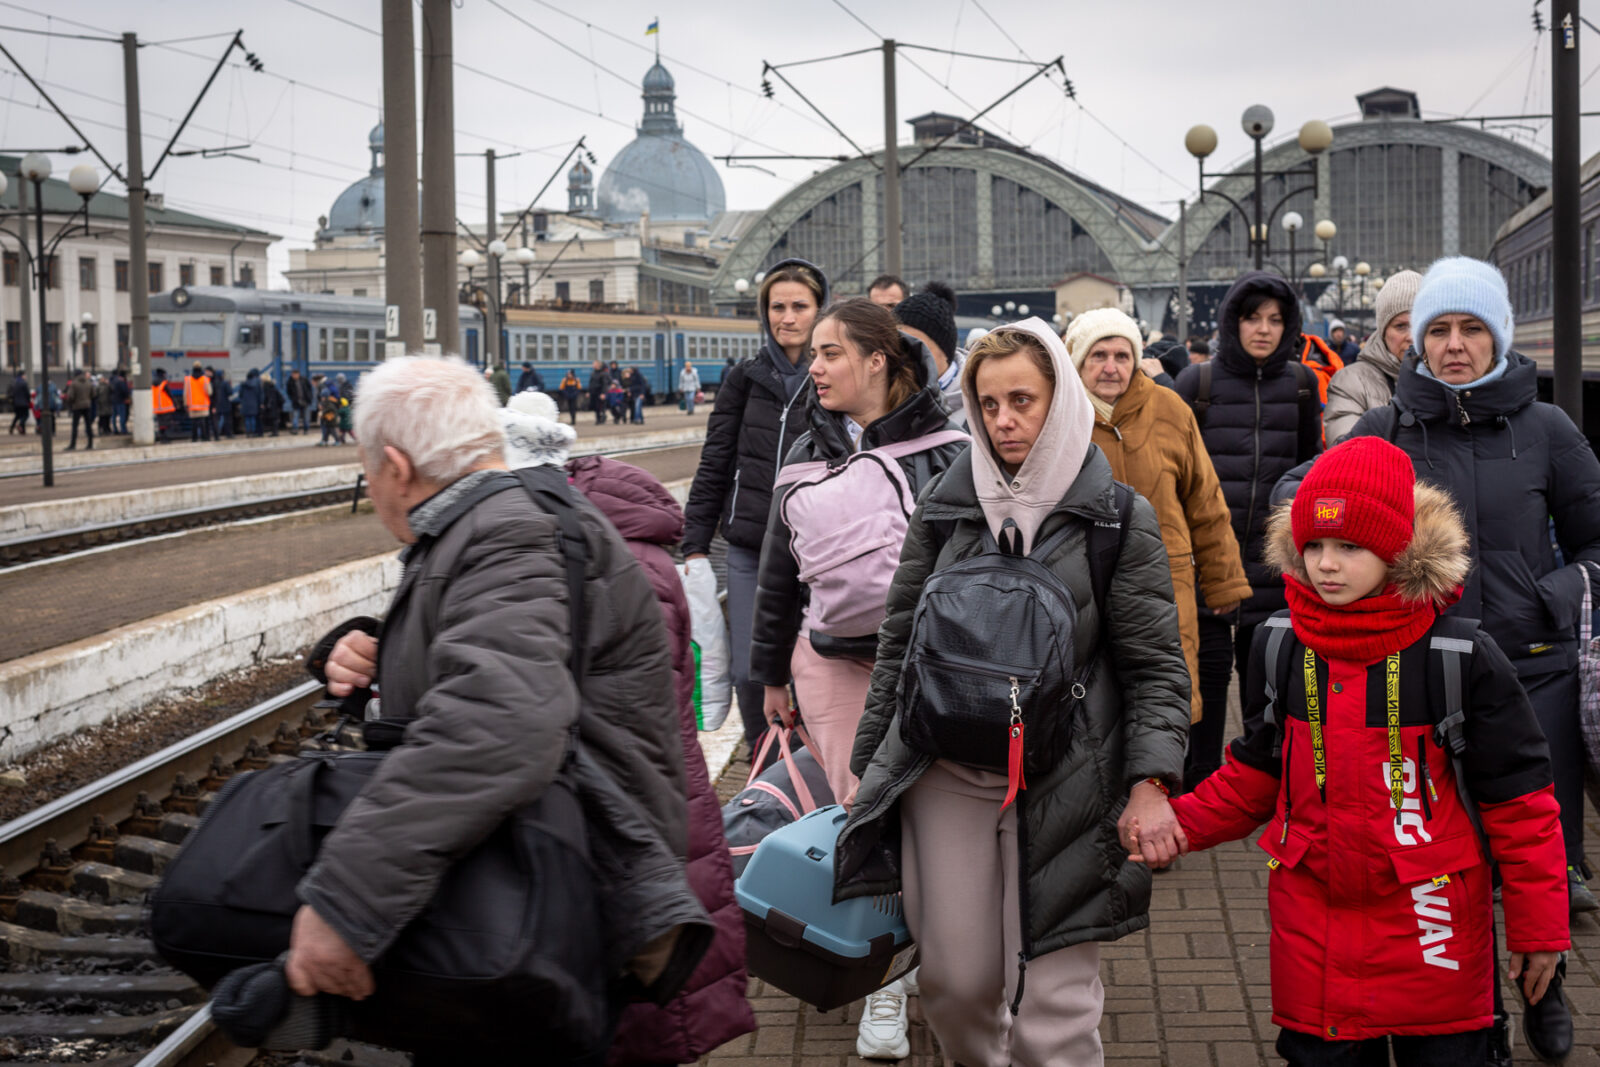 March 5: As the exodus from Ukraine intensifies, the Lviv railway station has become engulfed with people. Lviv is located about 50 miles from the Polish border. Here, families walk over the rail lines to get to the station.